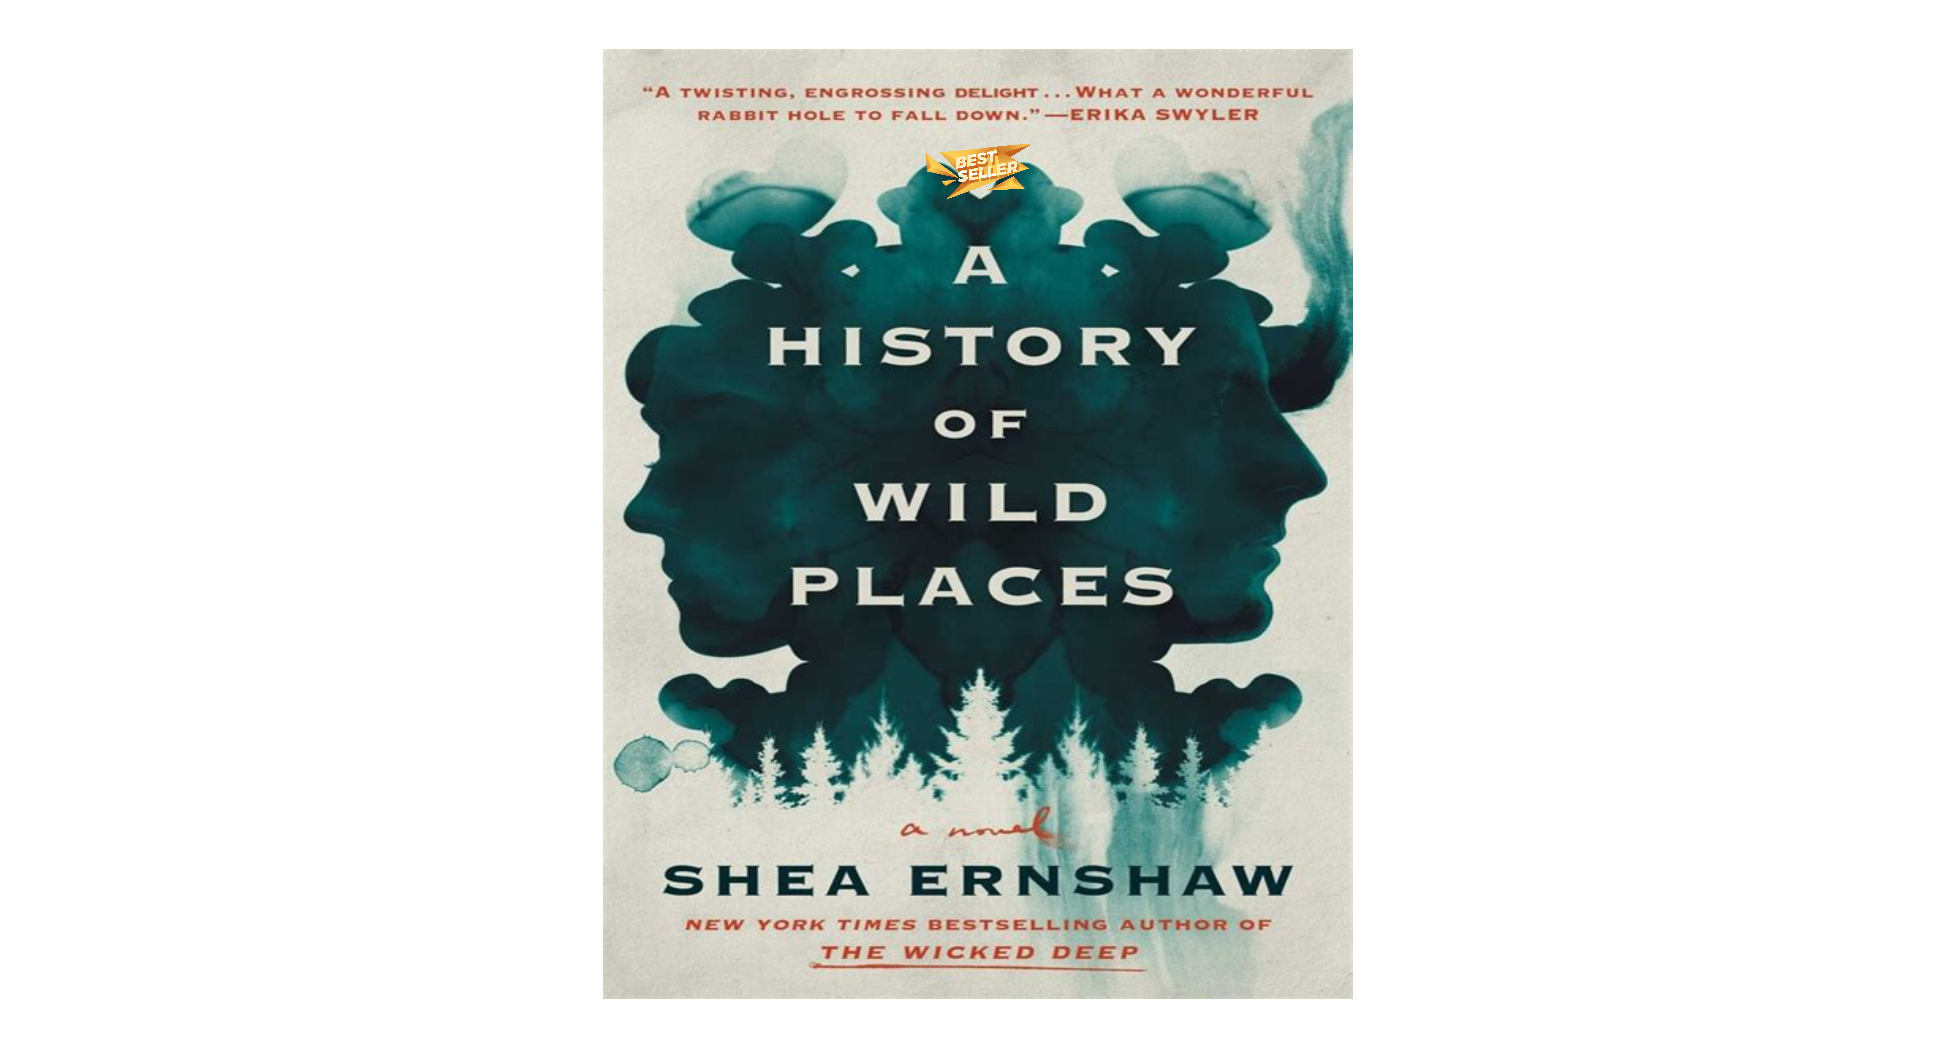 (Get) [PDF/KINDLE] A History of Wild Places by Shea Ernshaw Full Access_e0461454_23310995.jpg